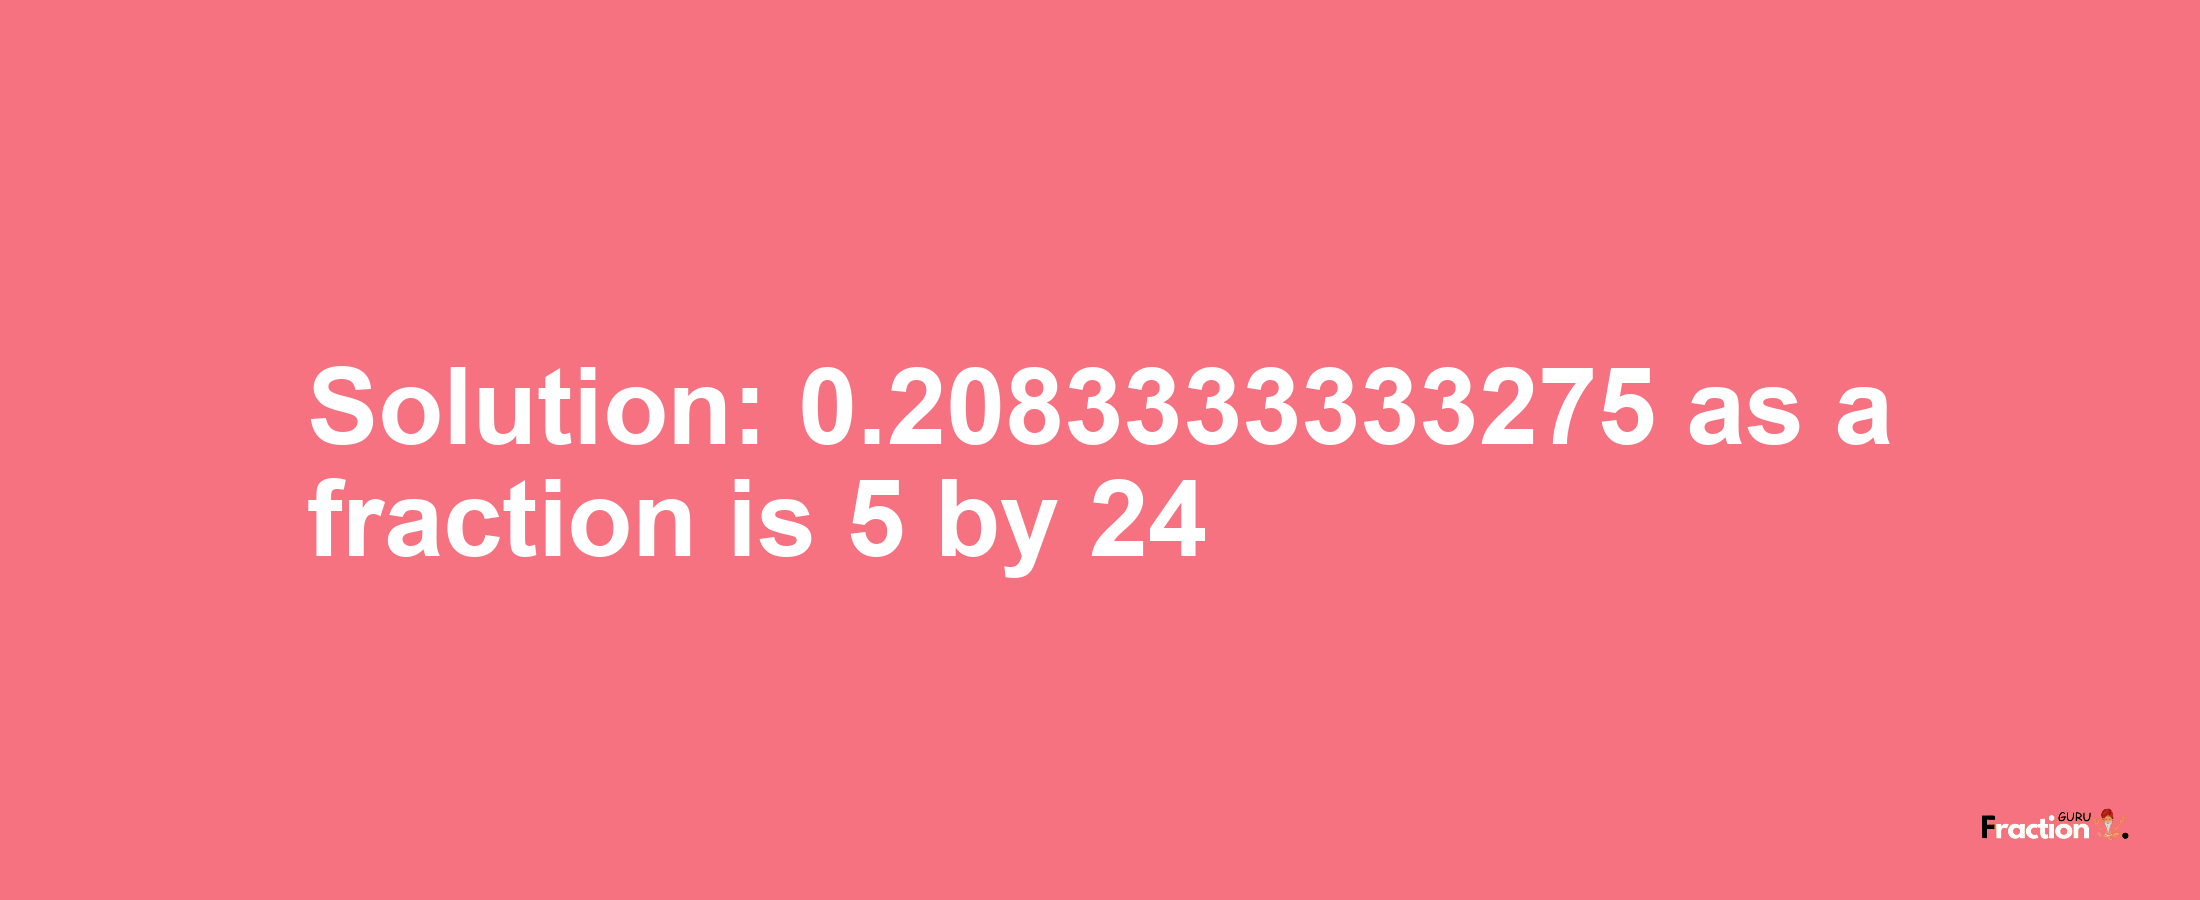 Solution:0.2083333333275 as a fraction is 5/24